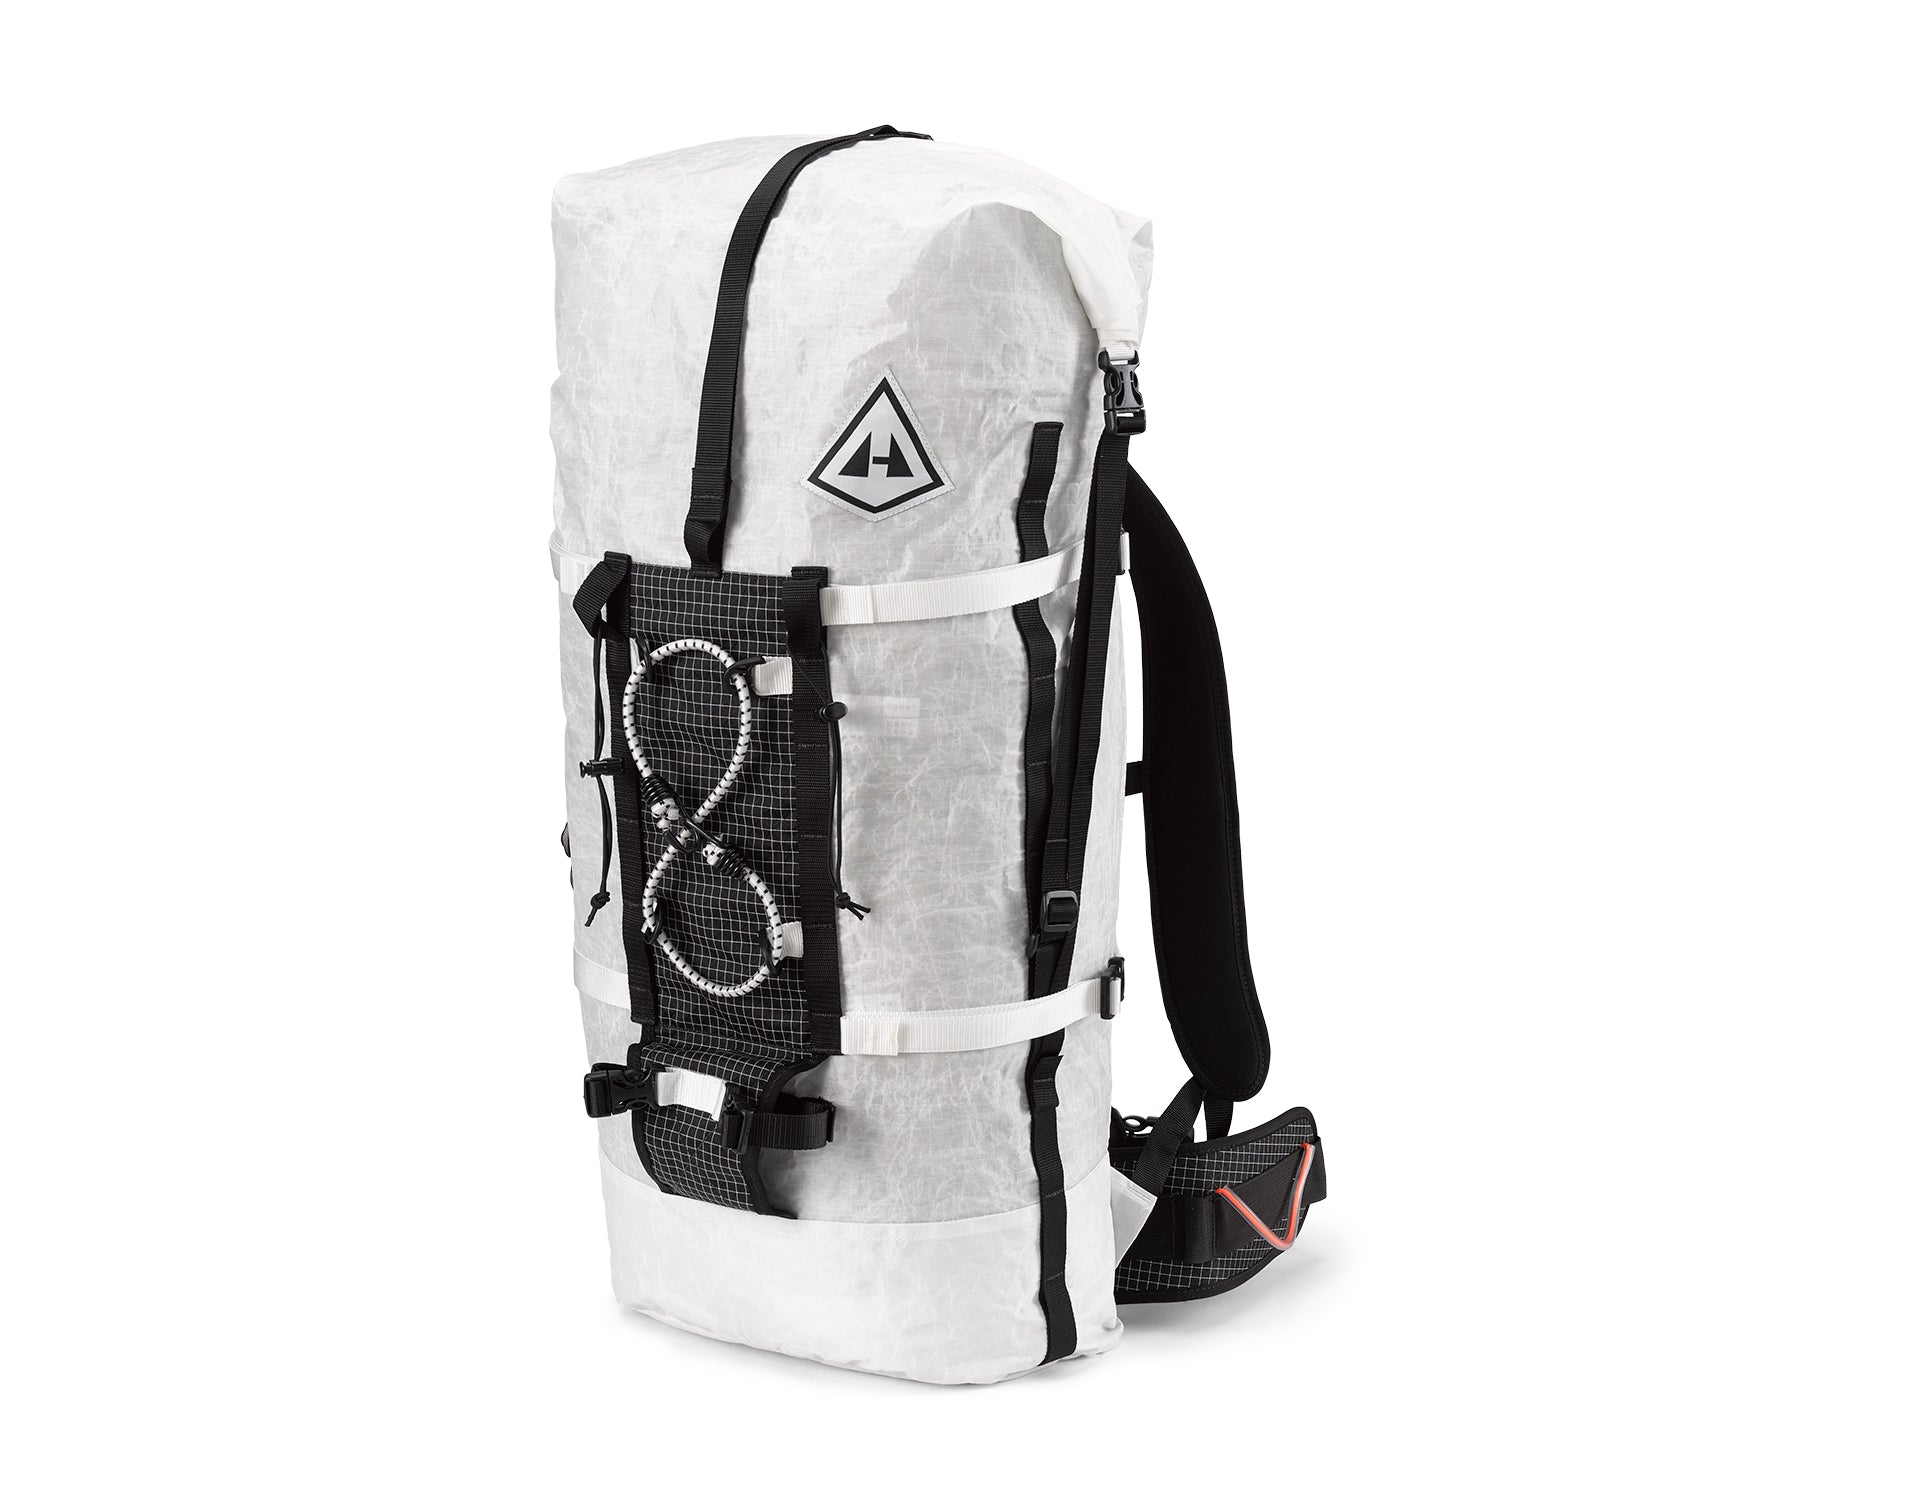 A white backpack with a strap attached to it.